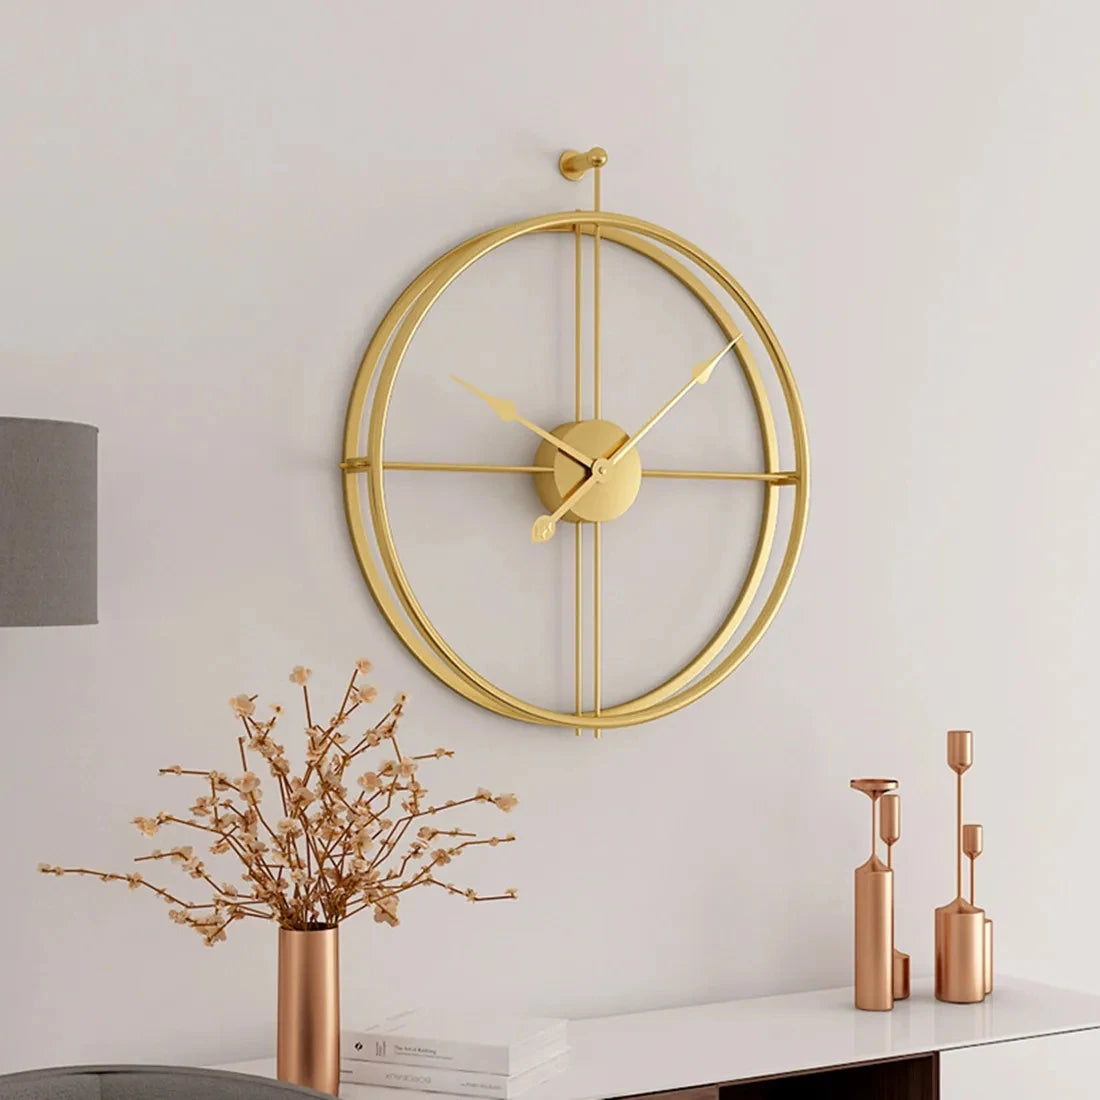 Modern golden Minimalist Ring Wall Clock with striking design in an interior setting.